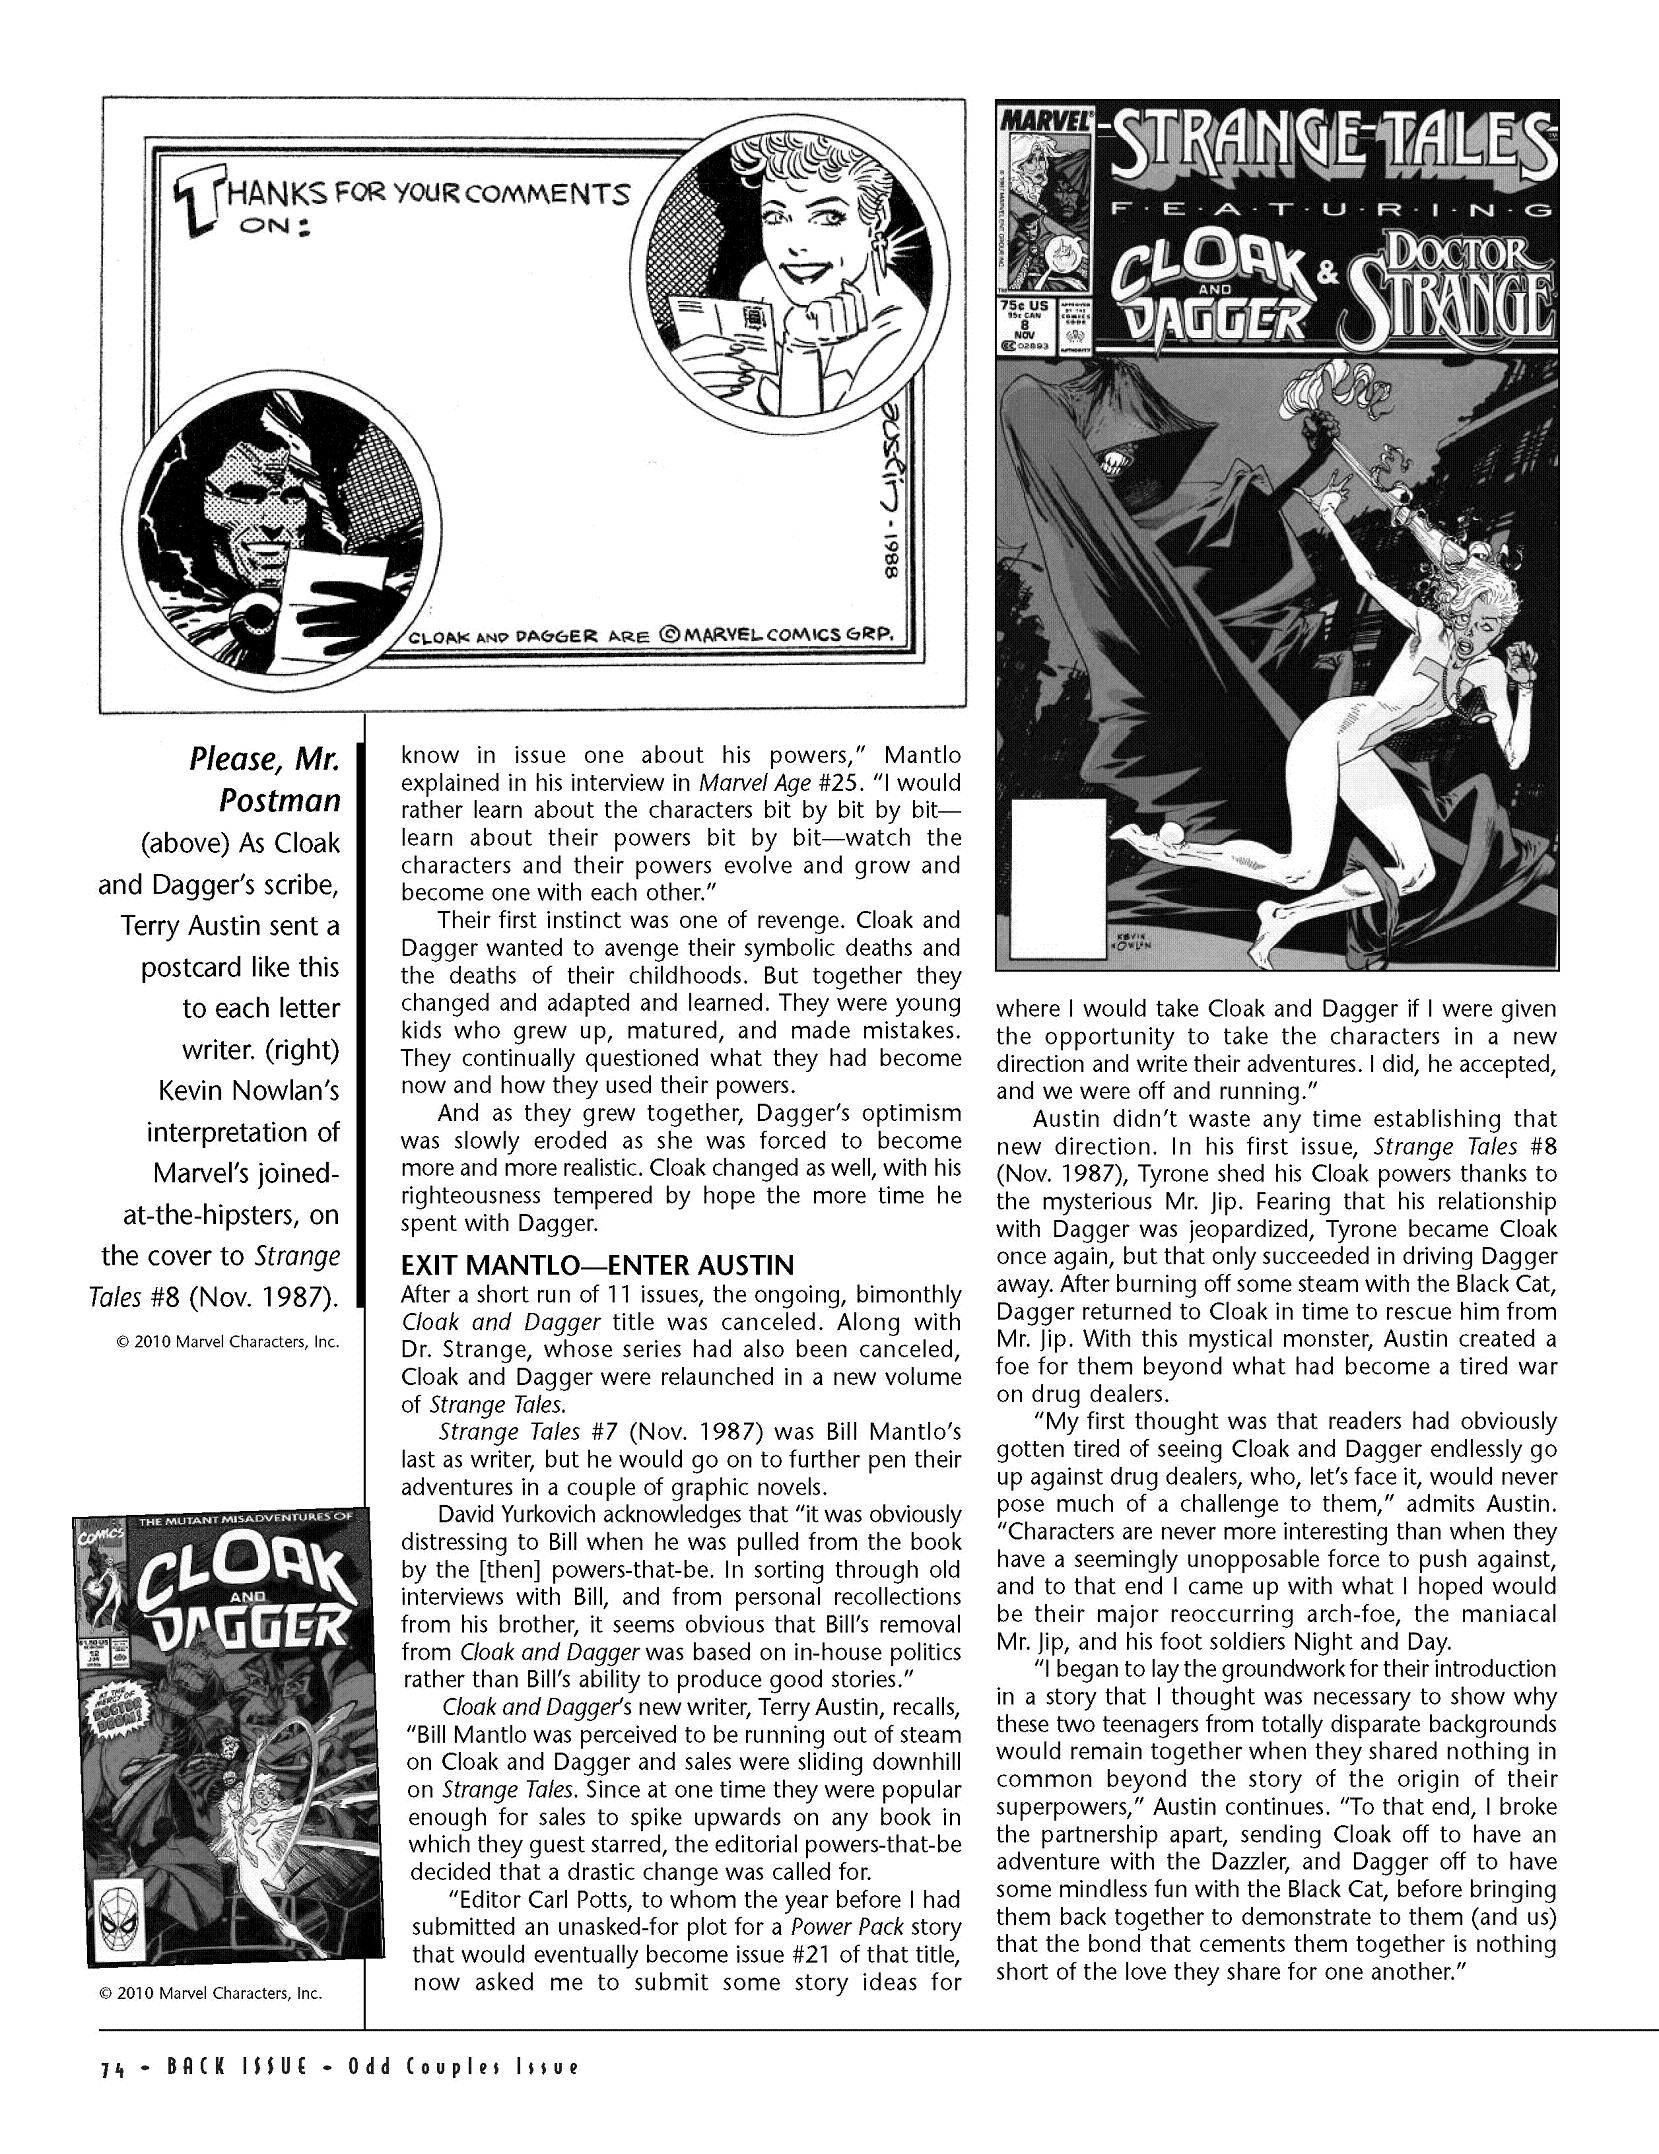 Read online Back Issue comic -  Issue #45 - 75